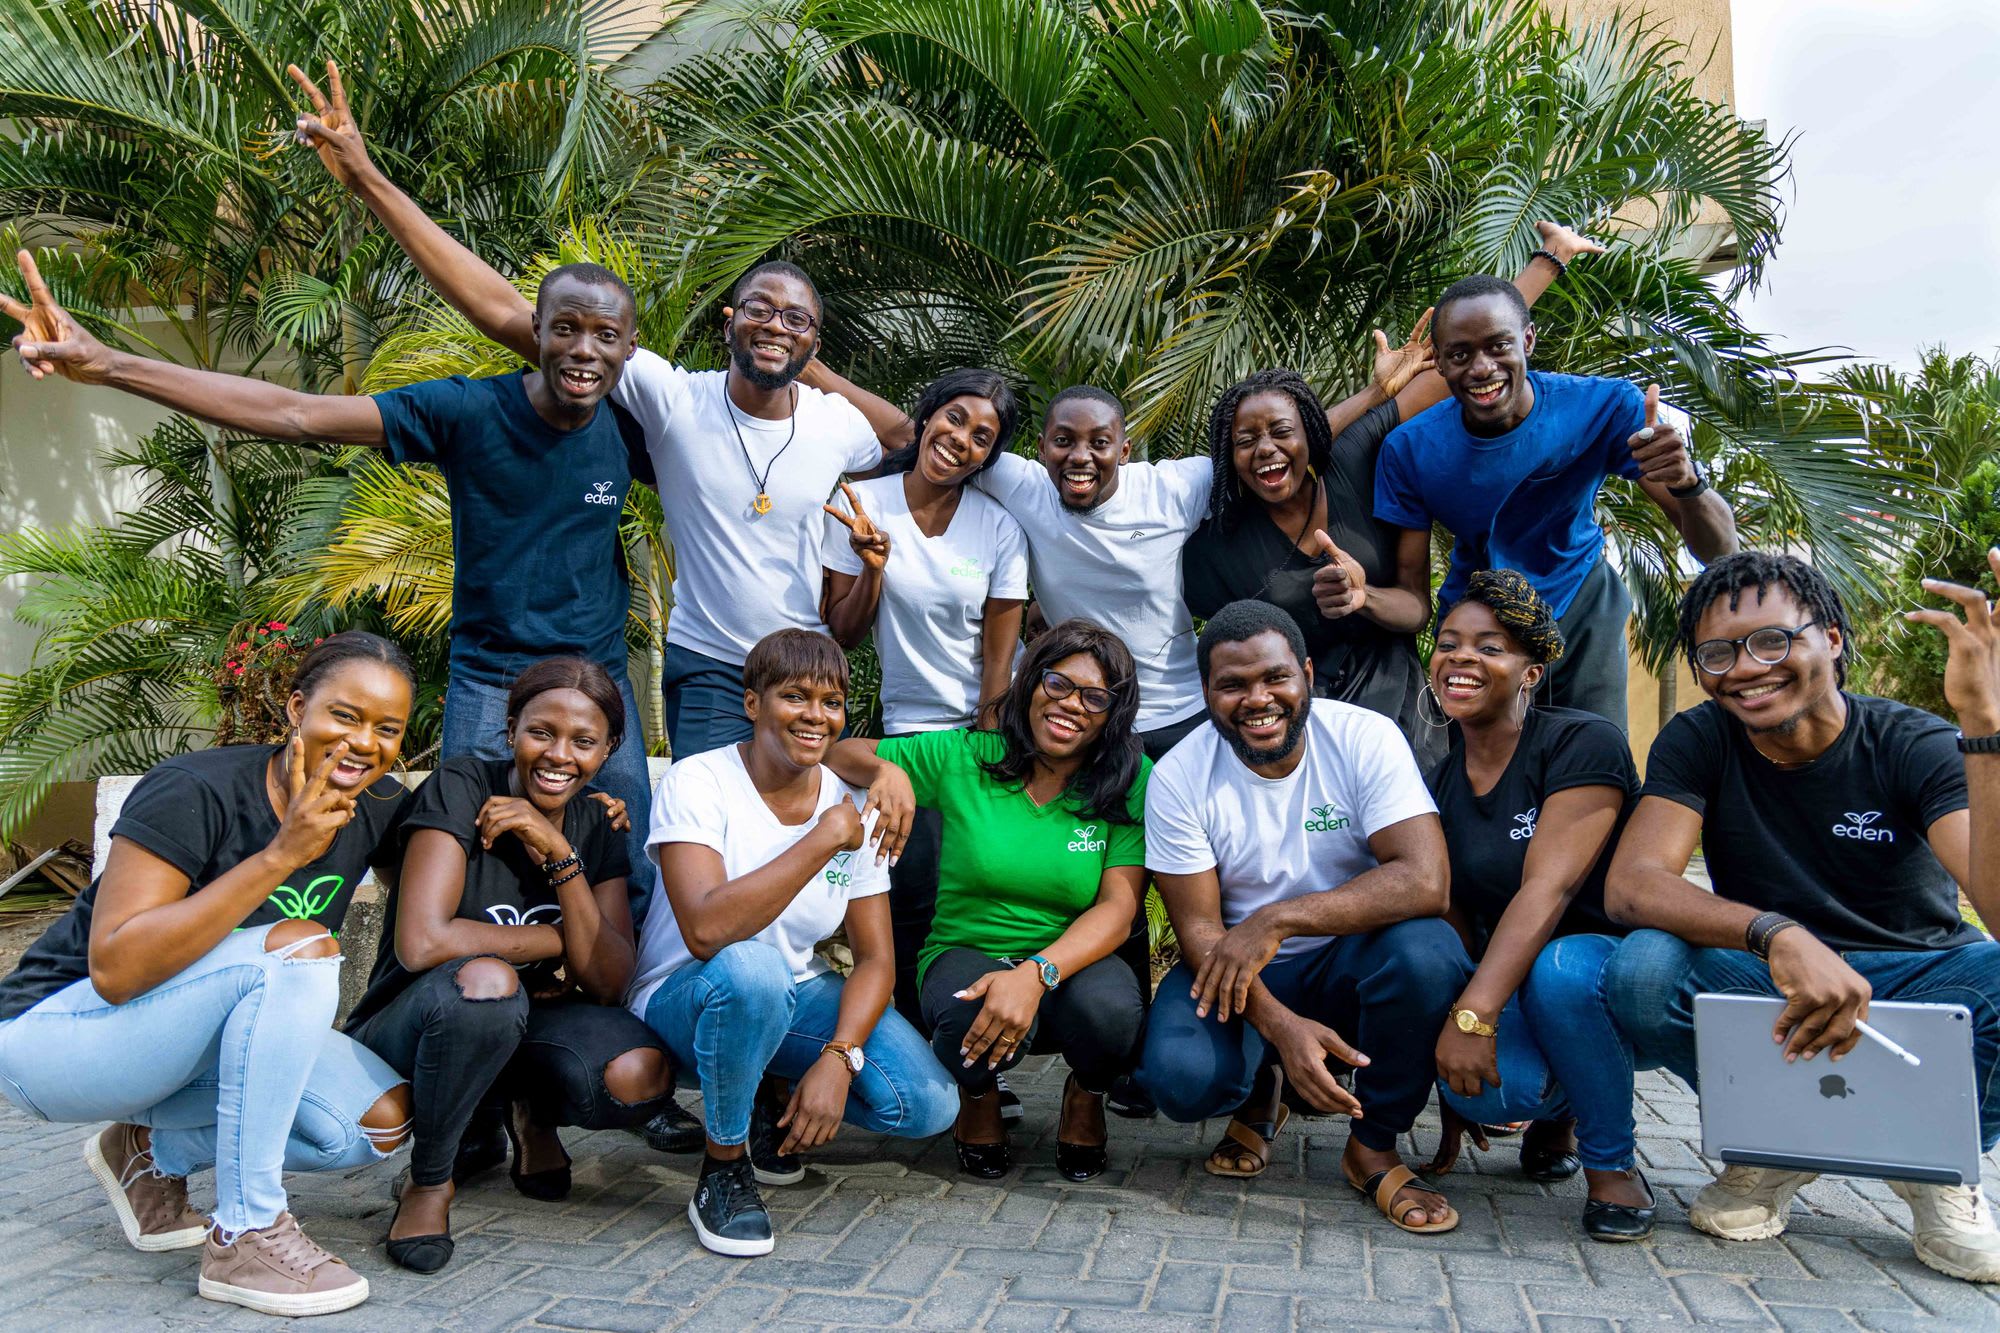 African startups raised $4 million including Norebase, GoMetro, and Kwely